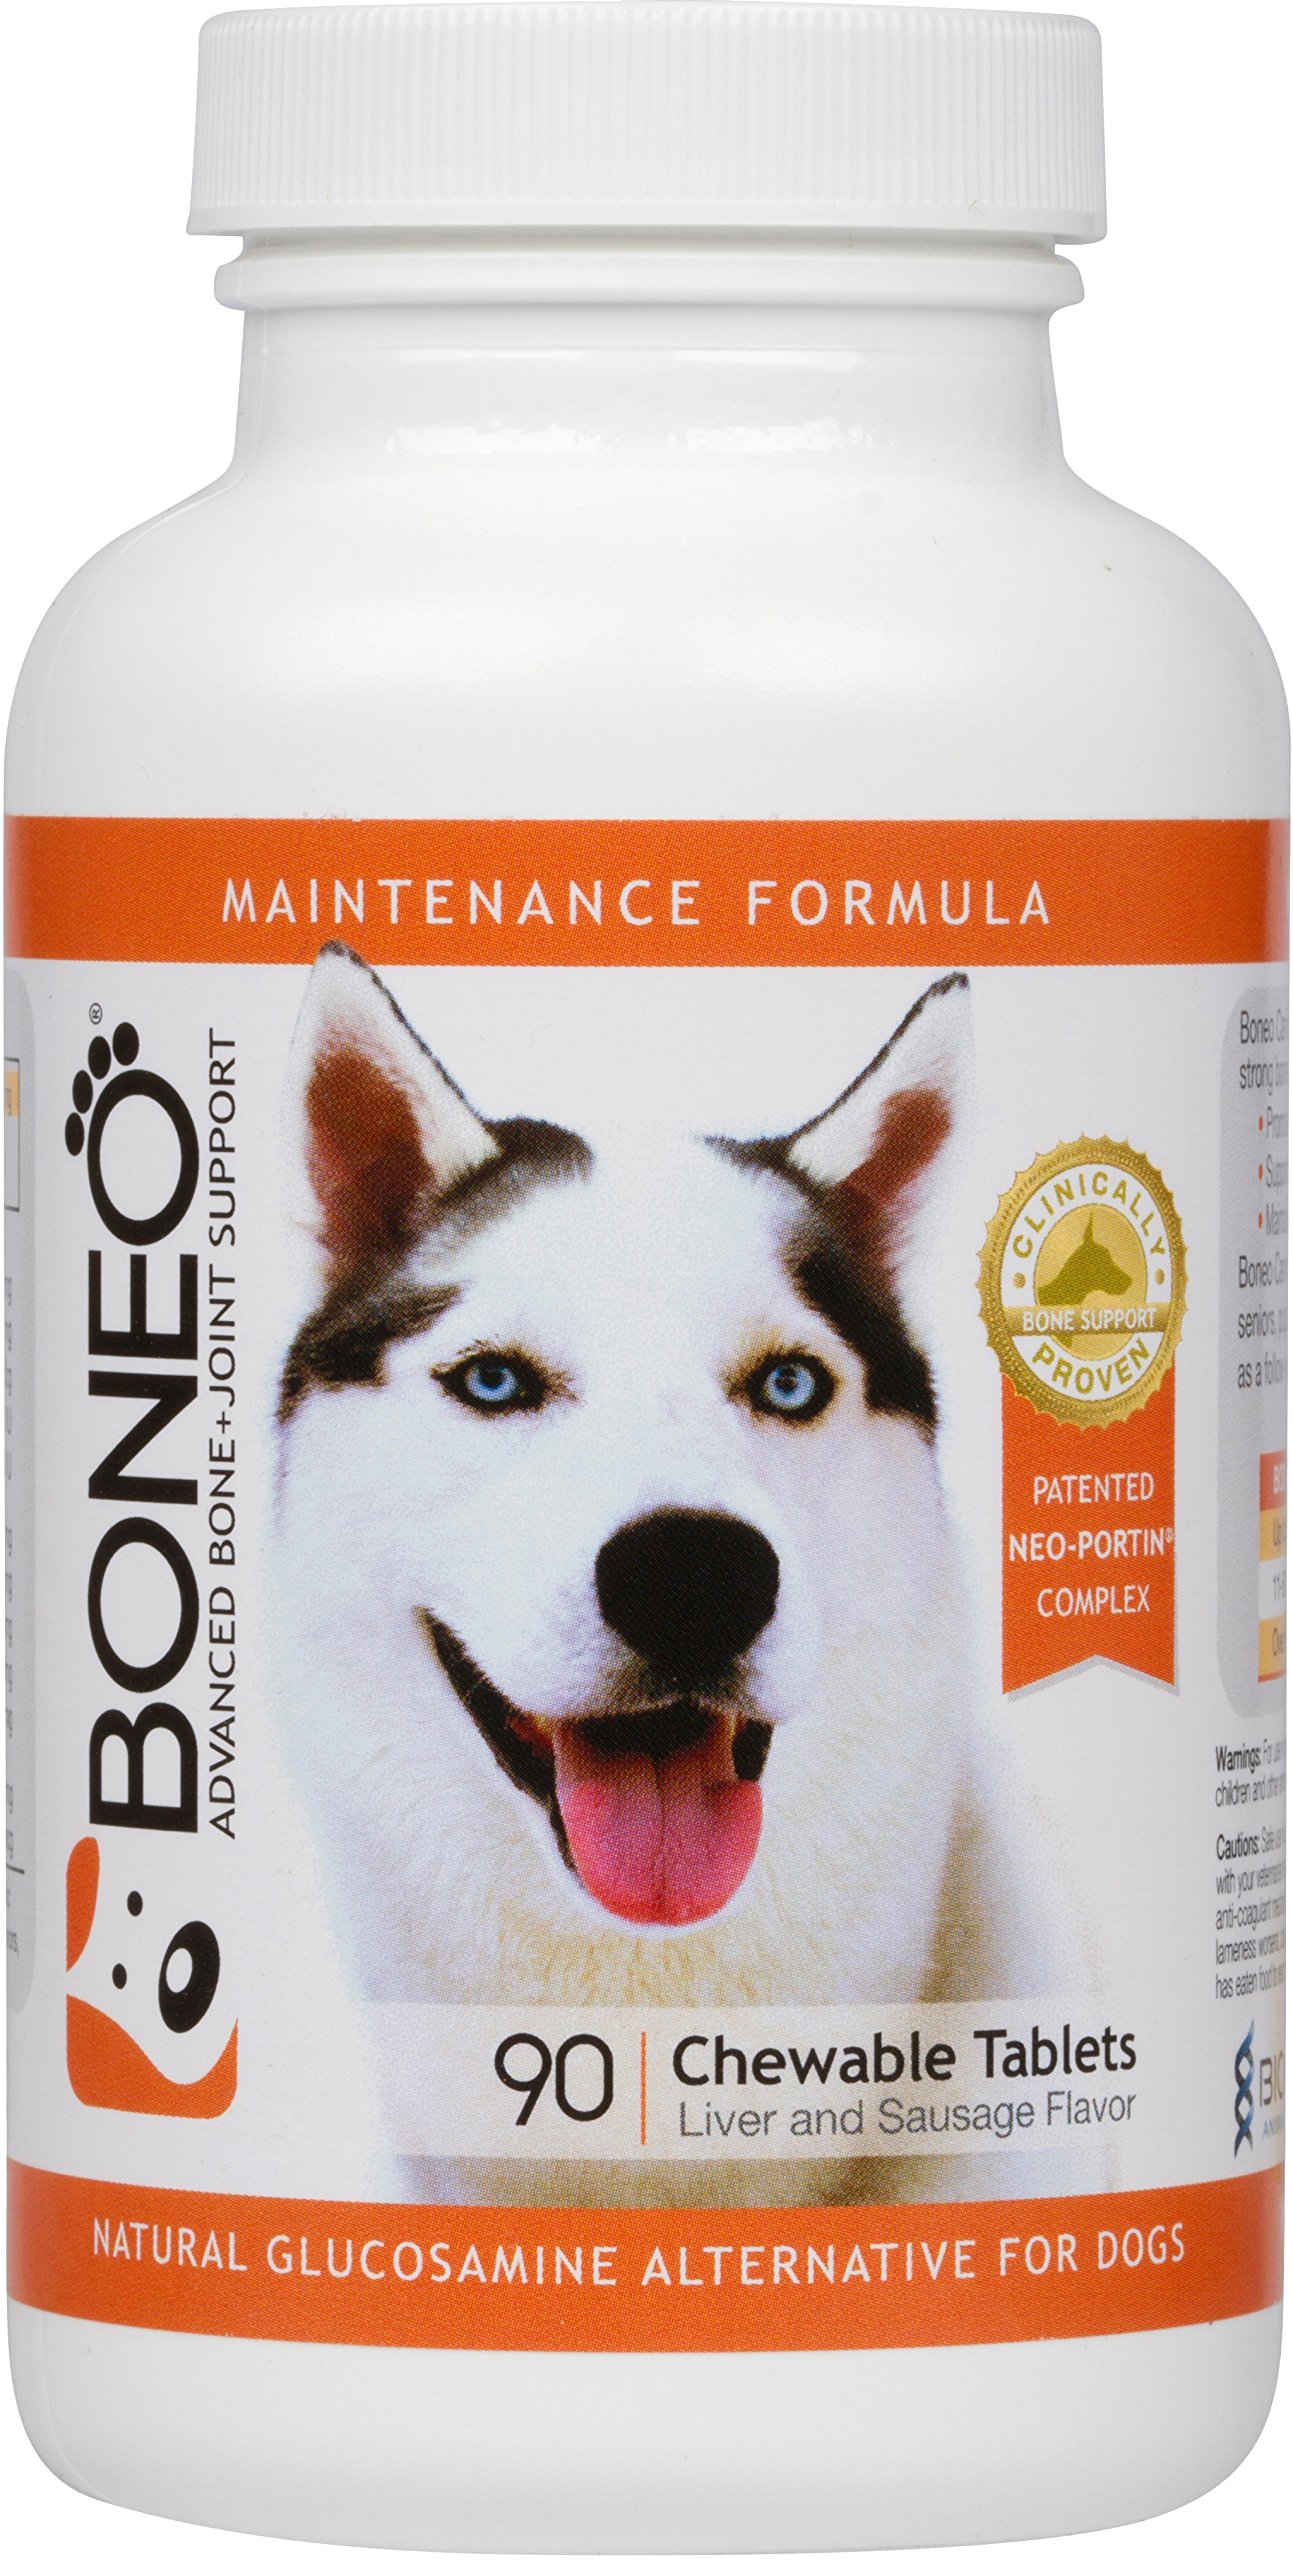 Boneo canine Maintenance Formula- Patented Bone And Joint Supplement For Dogs- 90 ct chewable Tablets Liver And Sausage Flavor